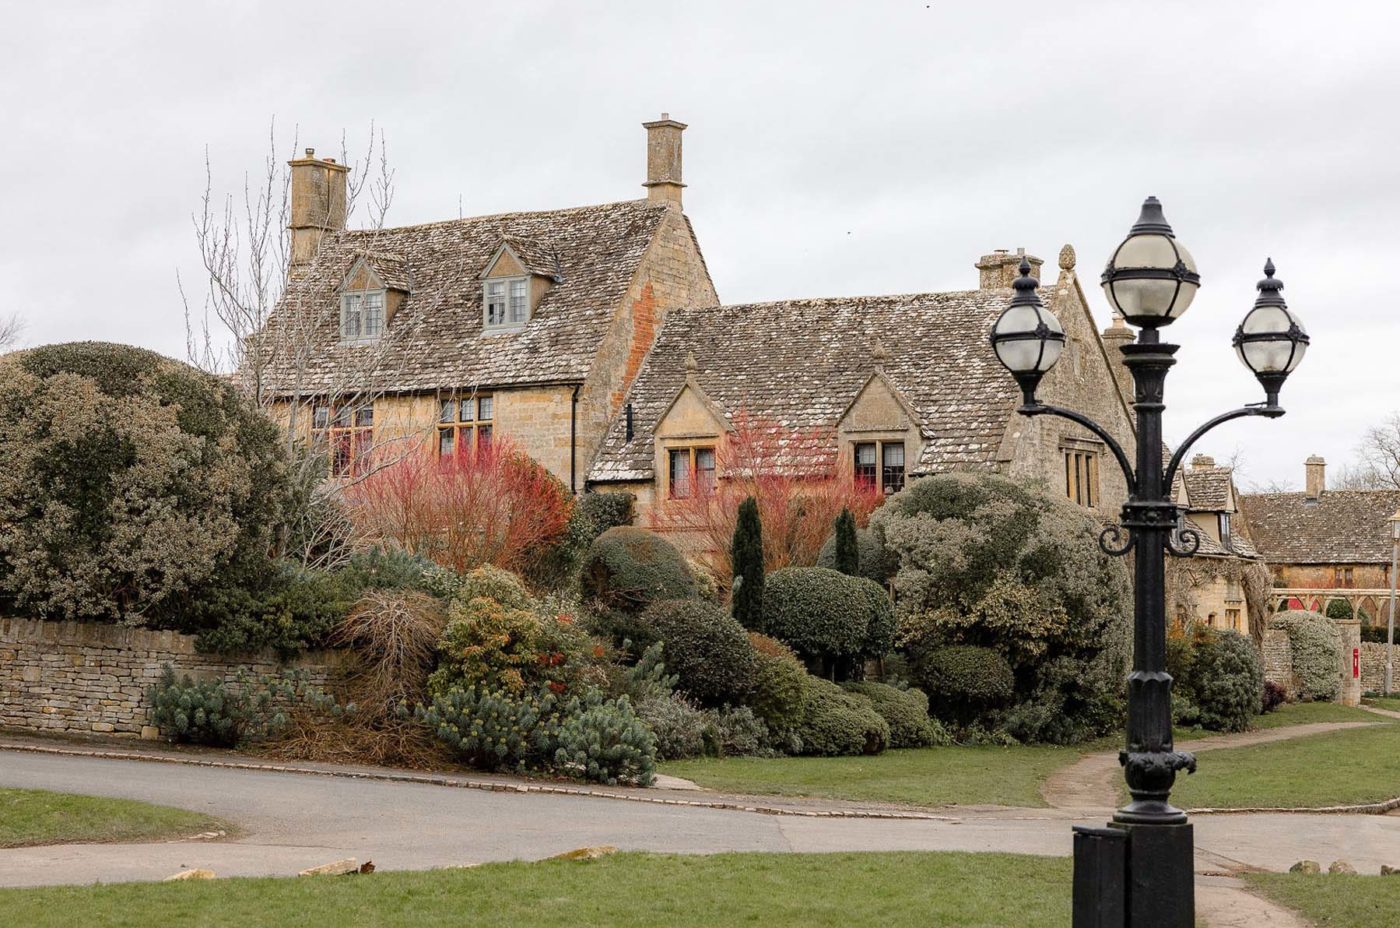 Houses in a Cotswold village